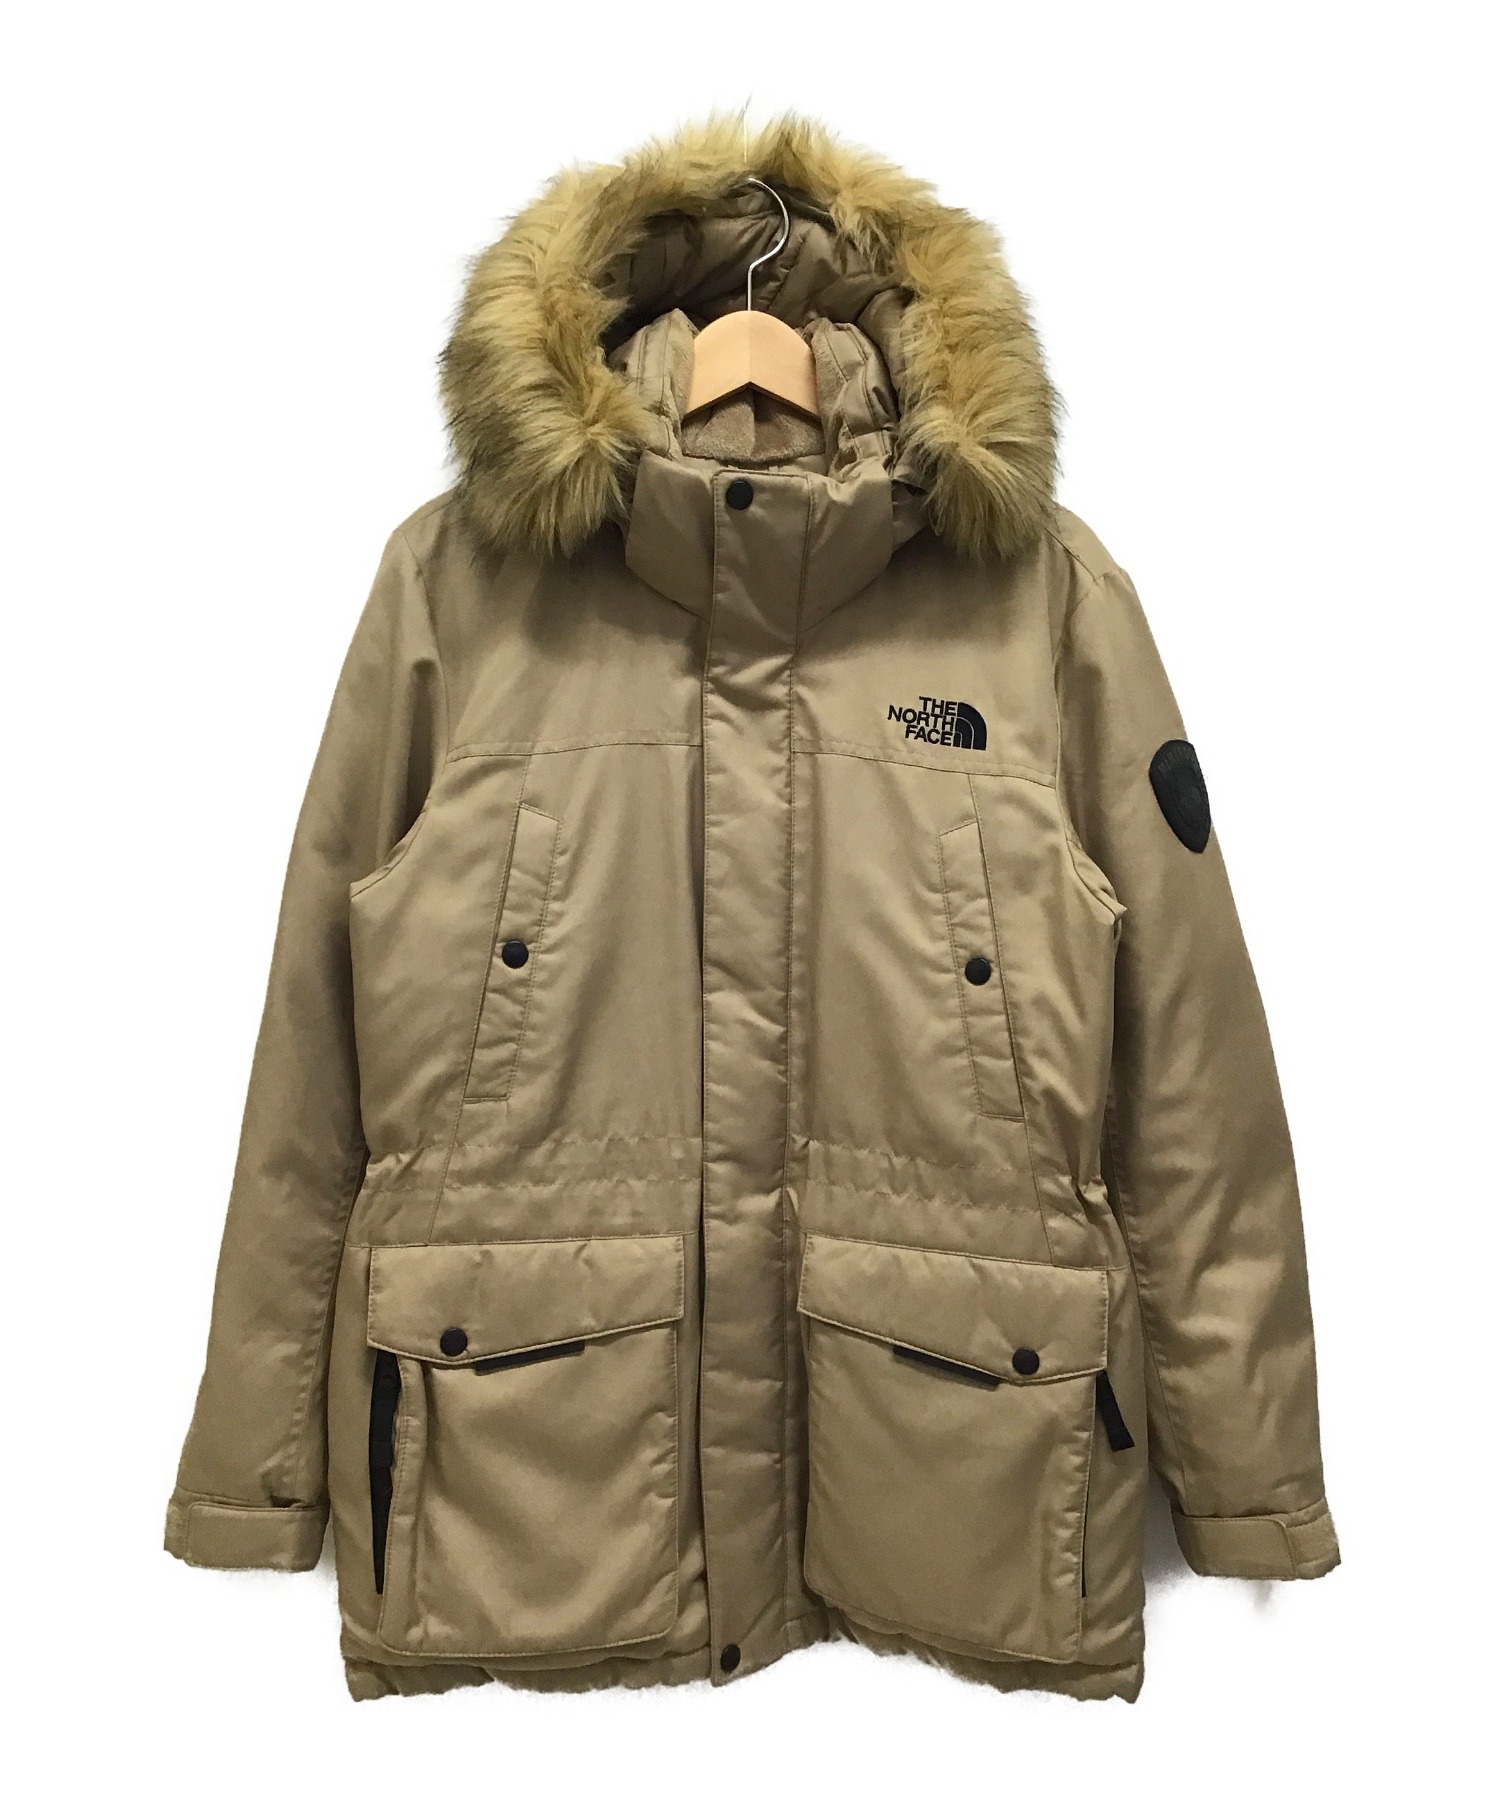 THE NORTH FACE - THE NORTH FACE ノースフェイス マクマード